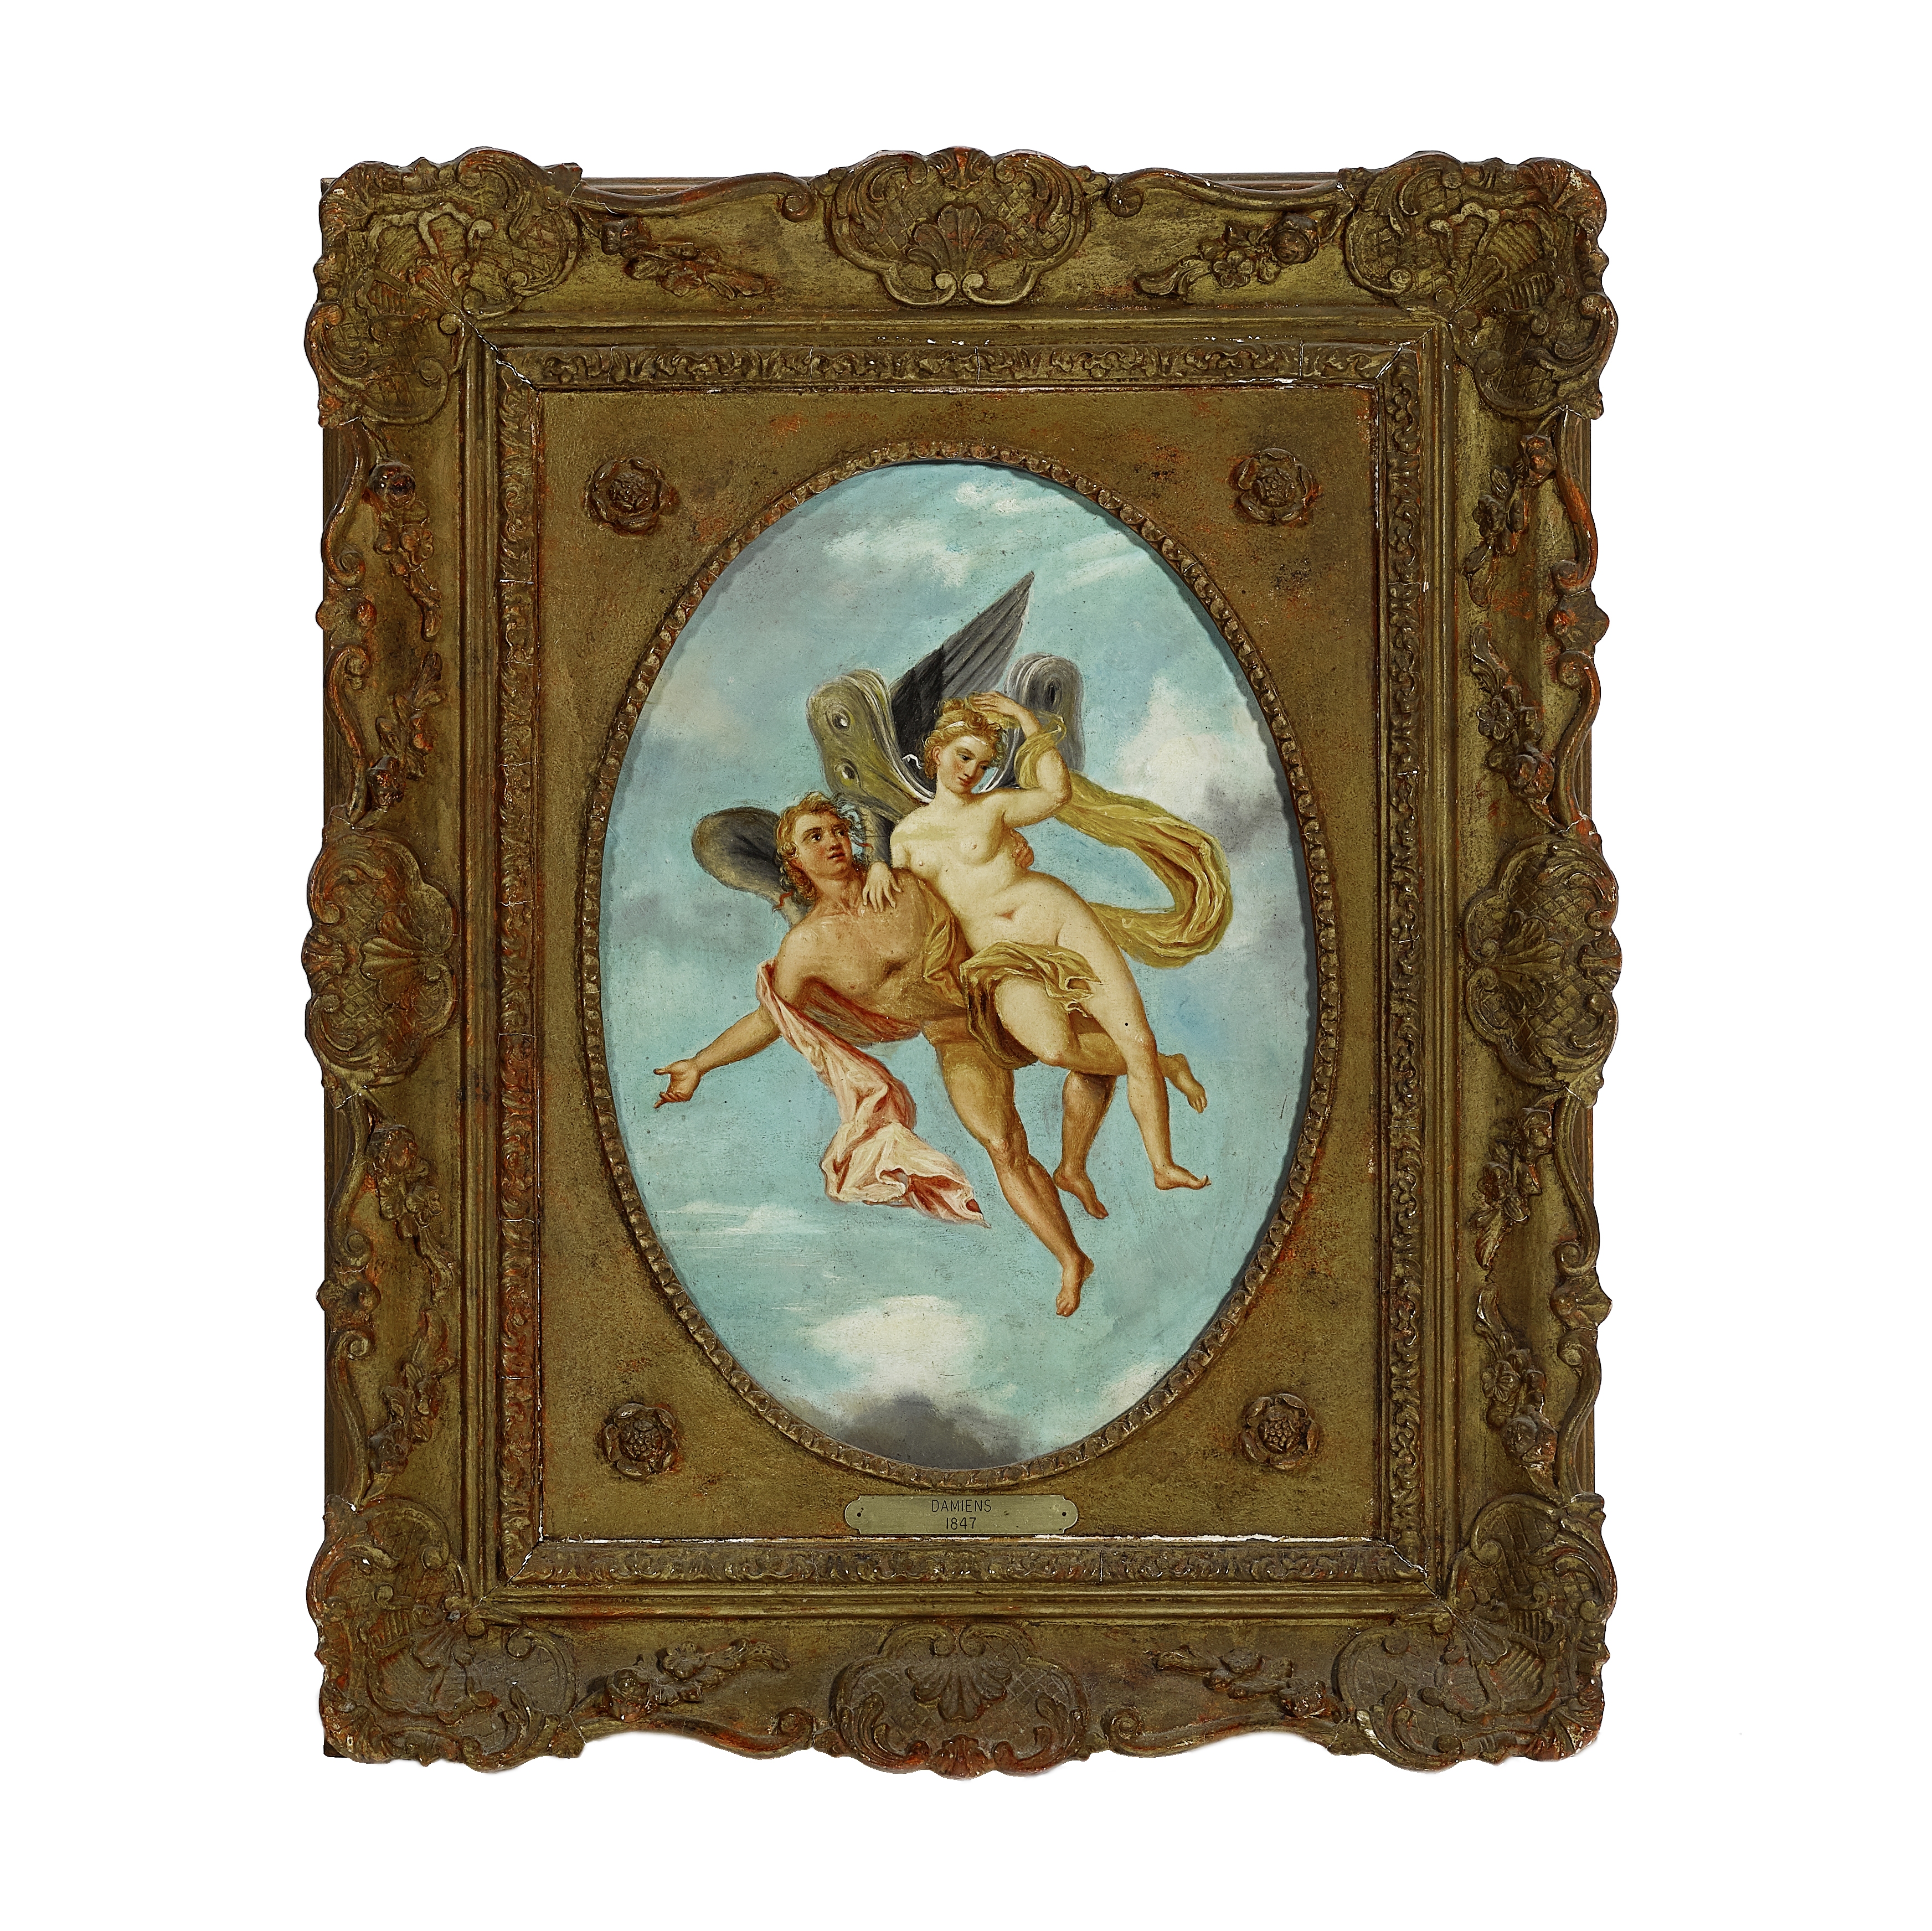 A painting of mythological figures from the collection of Mitzi Gaynor